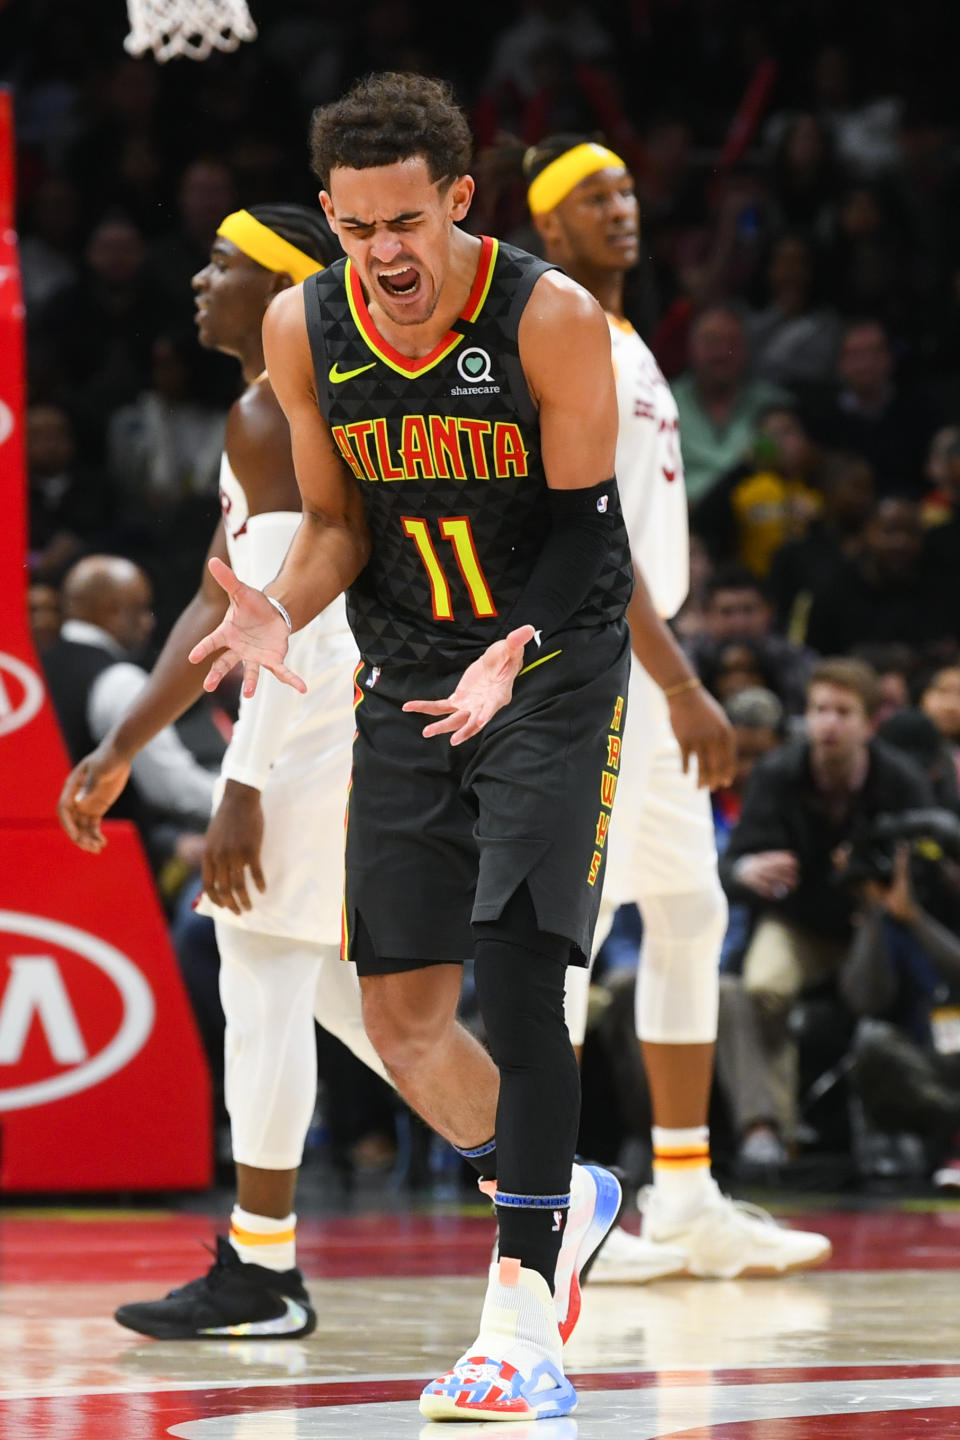 Atlanta Hawks guard Trae Young (11) reacts during the second half of an NBA basketball game against the Indiana Pacers, Saturday, Jan. 4, 2020, in Atlanta. (AP Photo/John Amis)